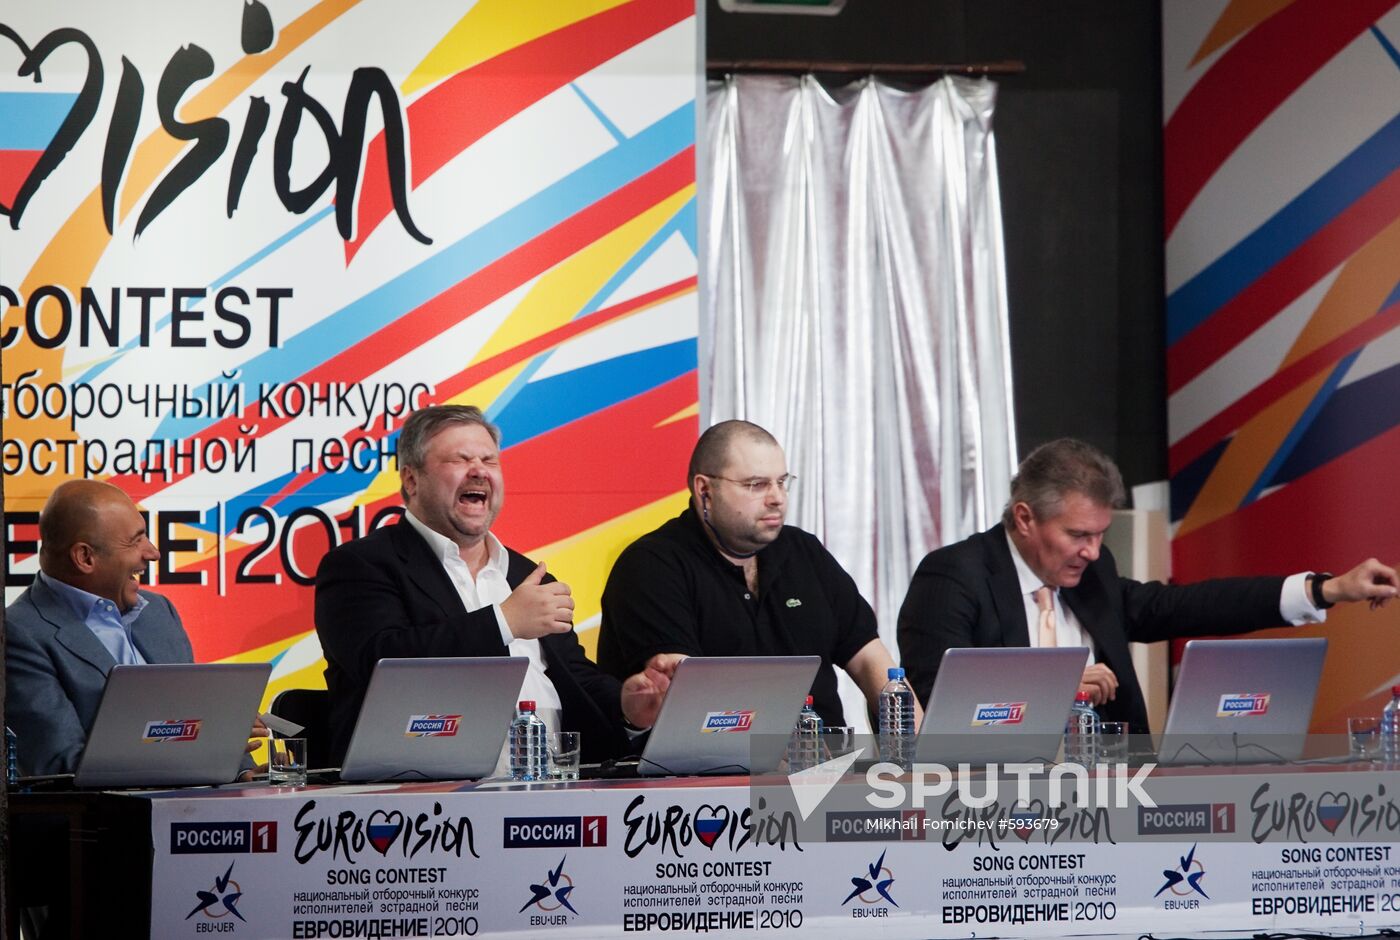 Eurovision 2010 national qualifying round in Russia